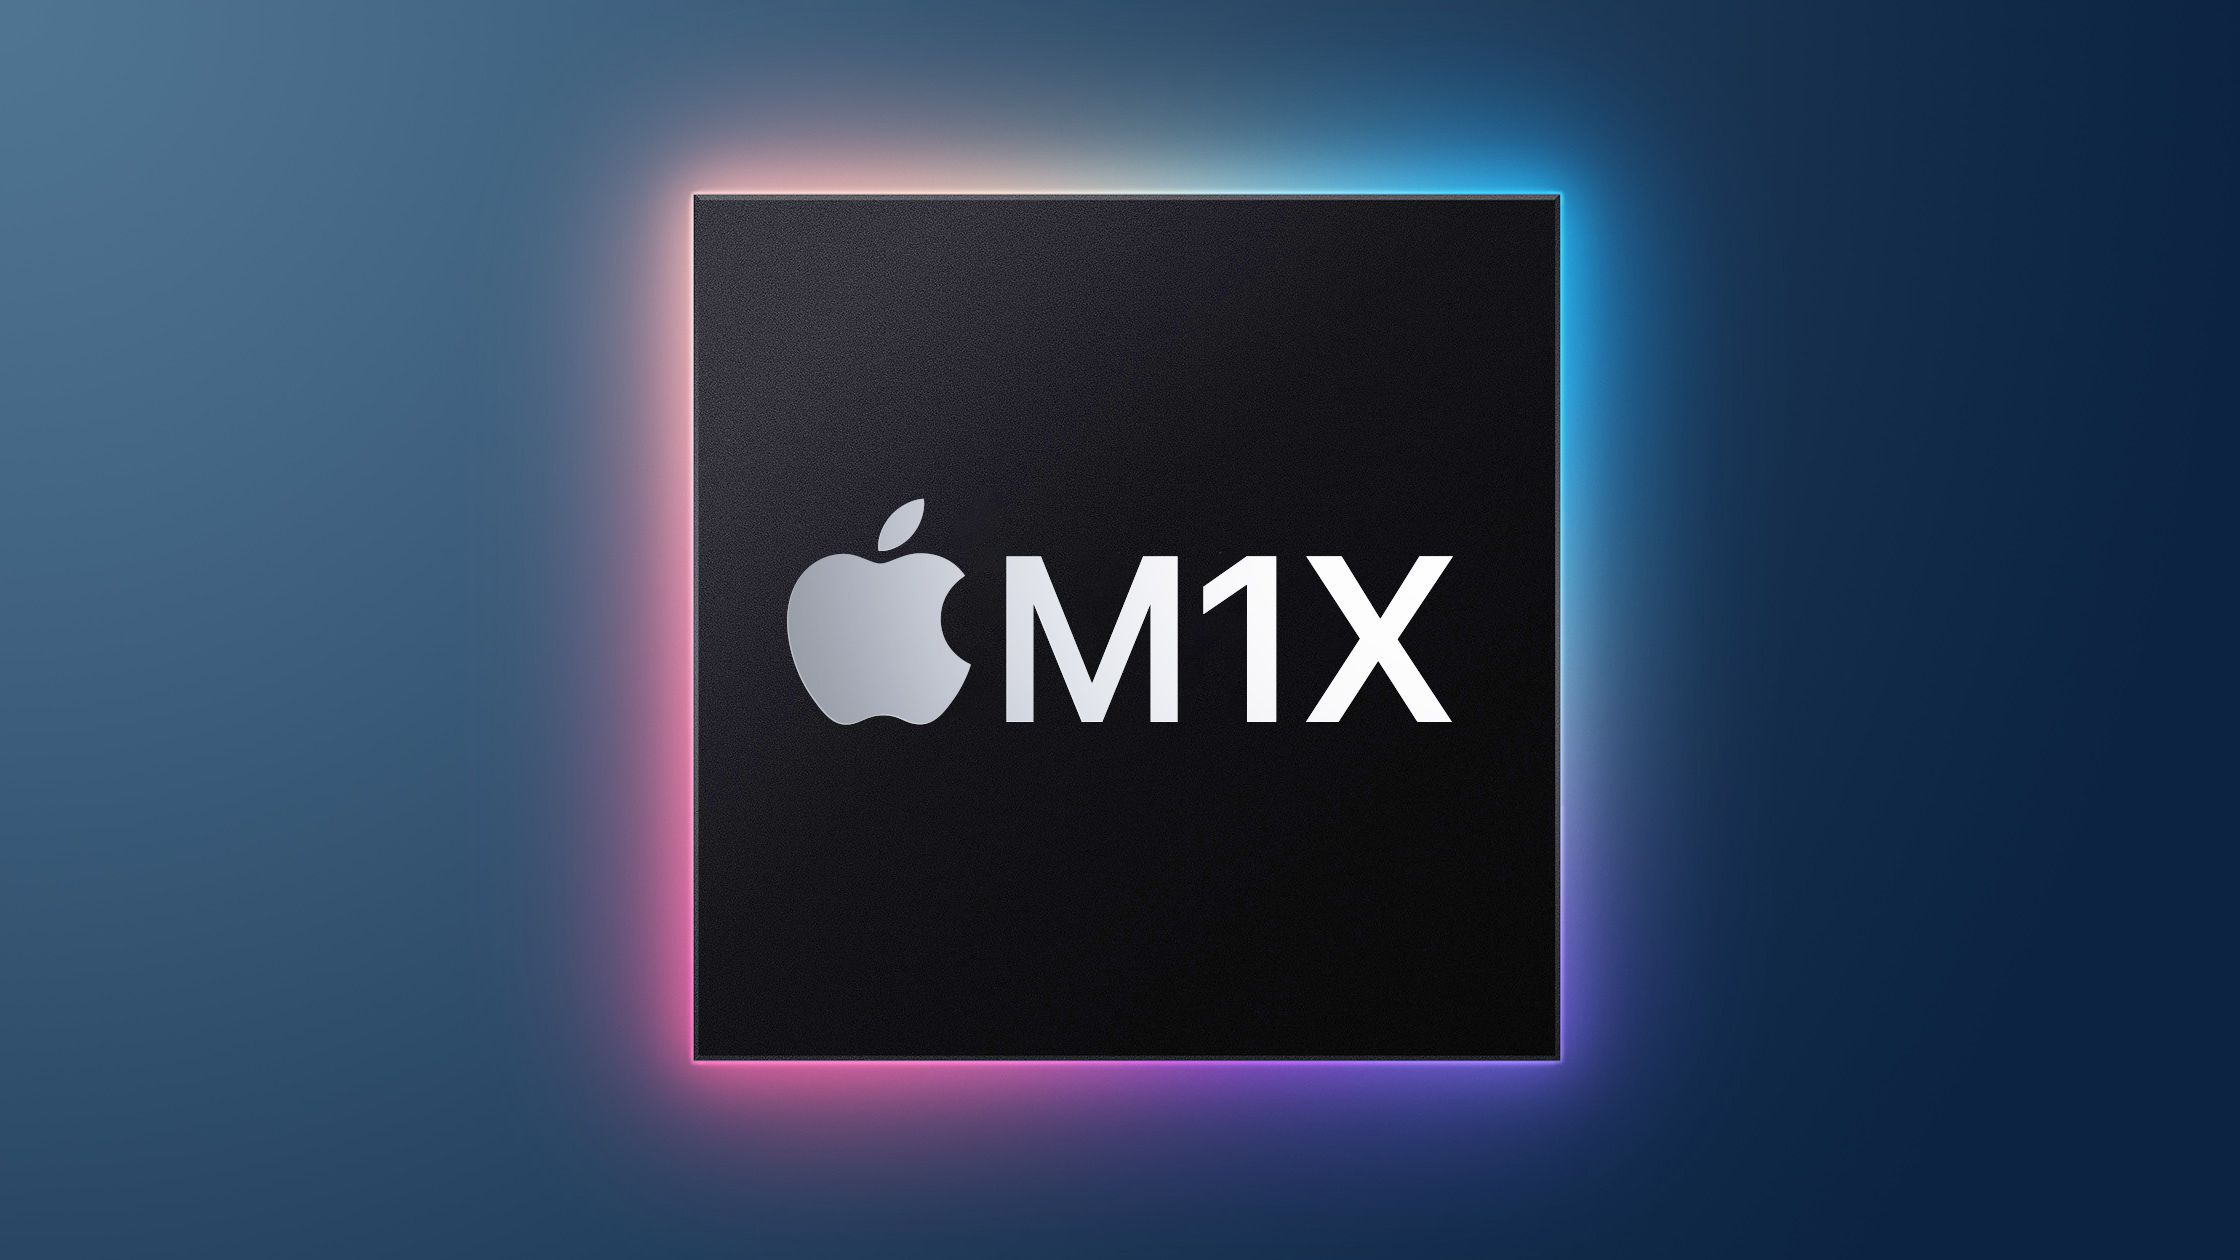 During WWDC 2020, Apple announced that they would be transitioning away from Intel and producing their own Apple Silicon chips for their Macs. The tra